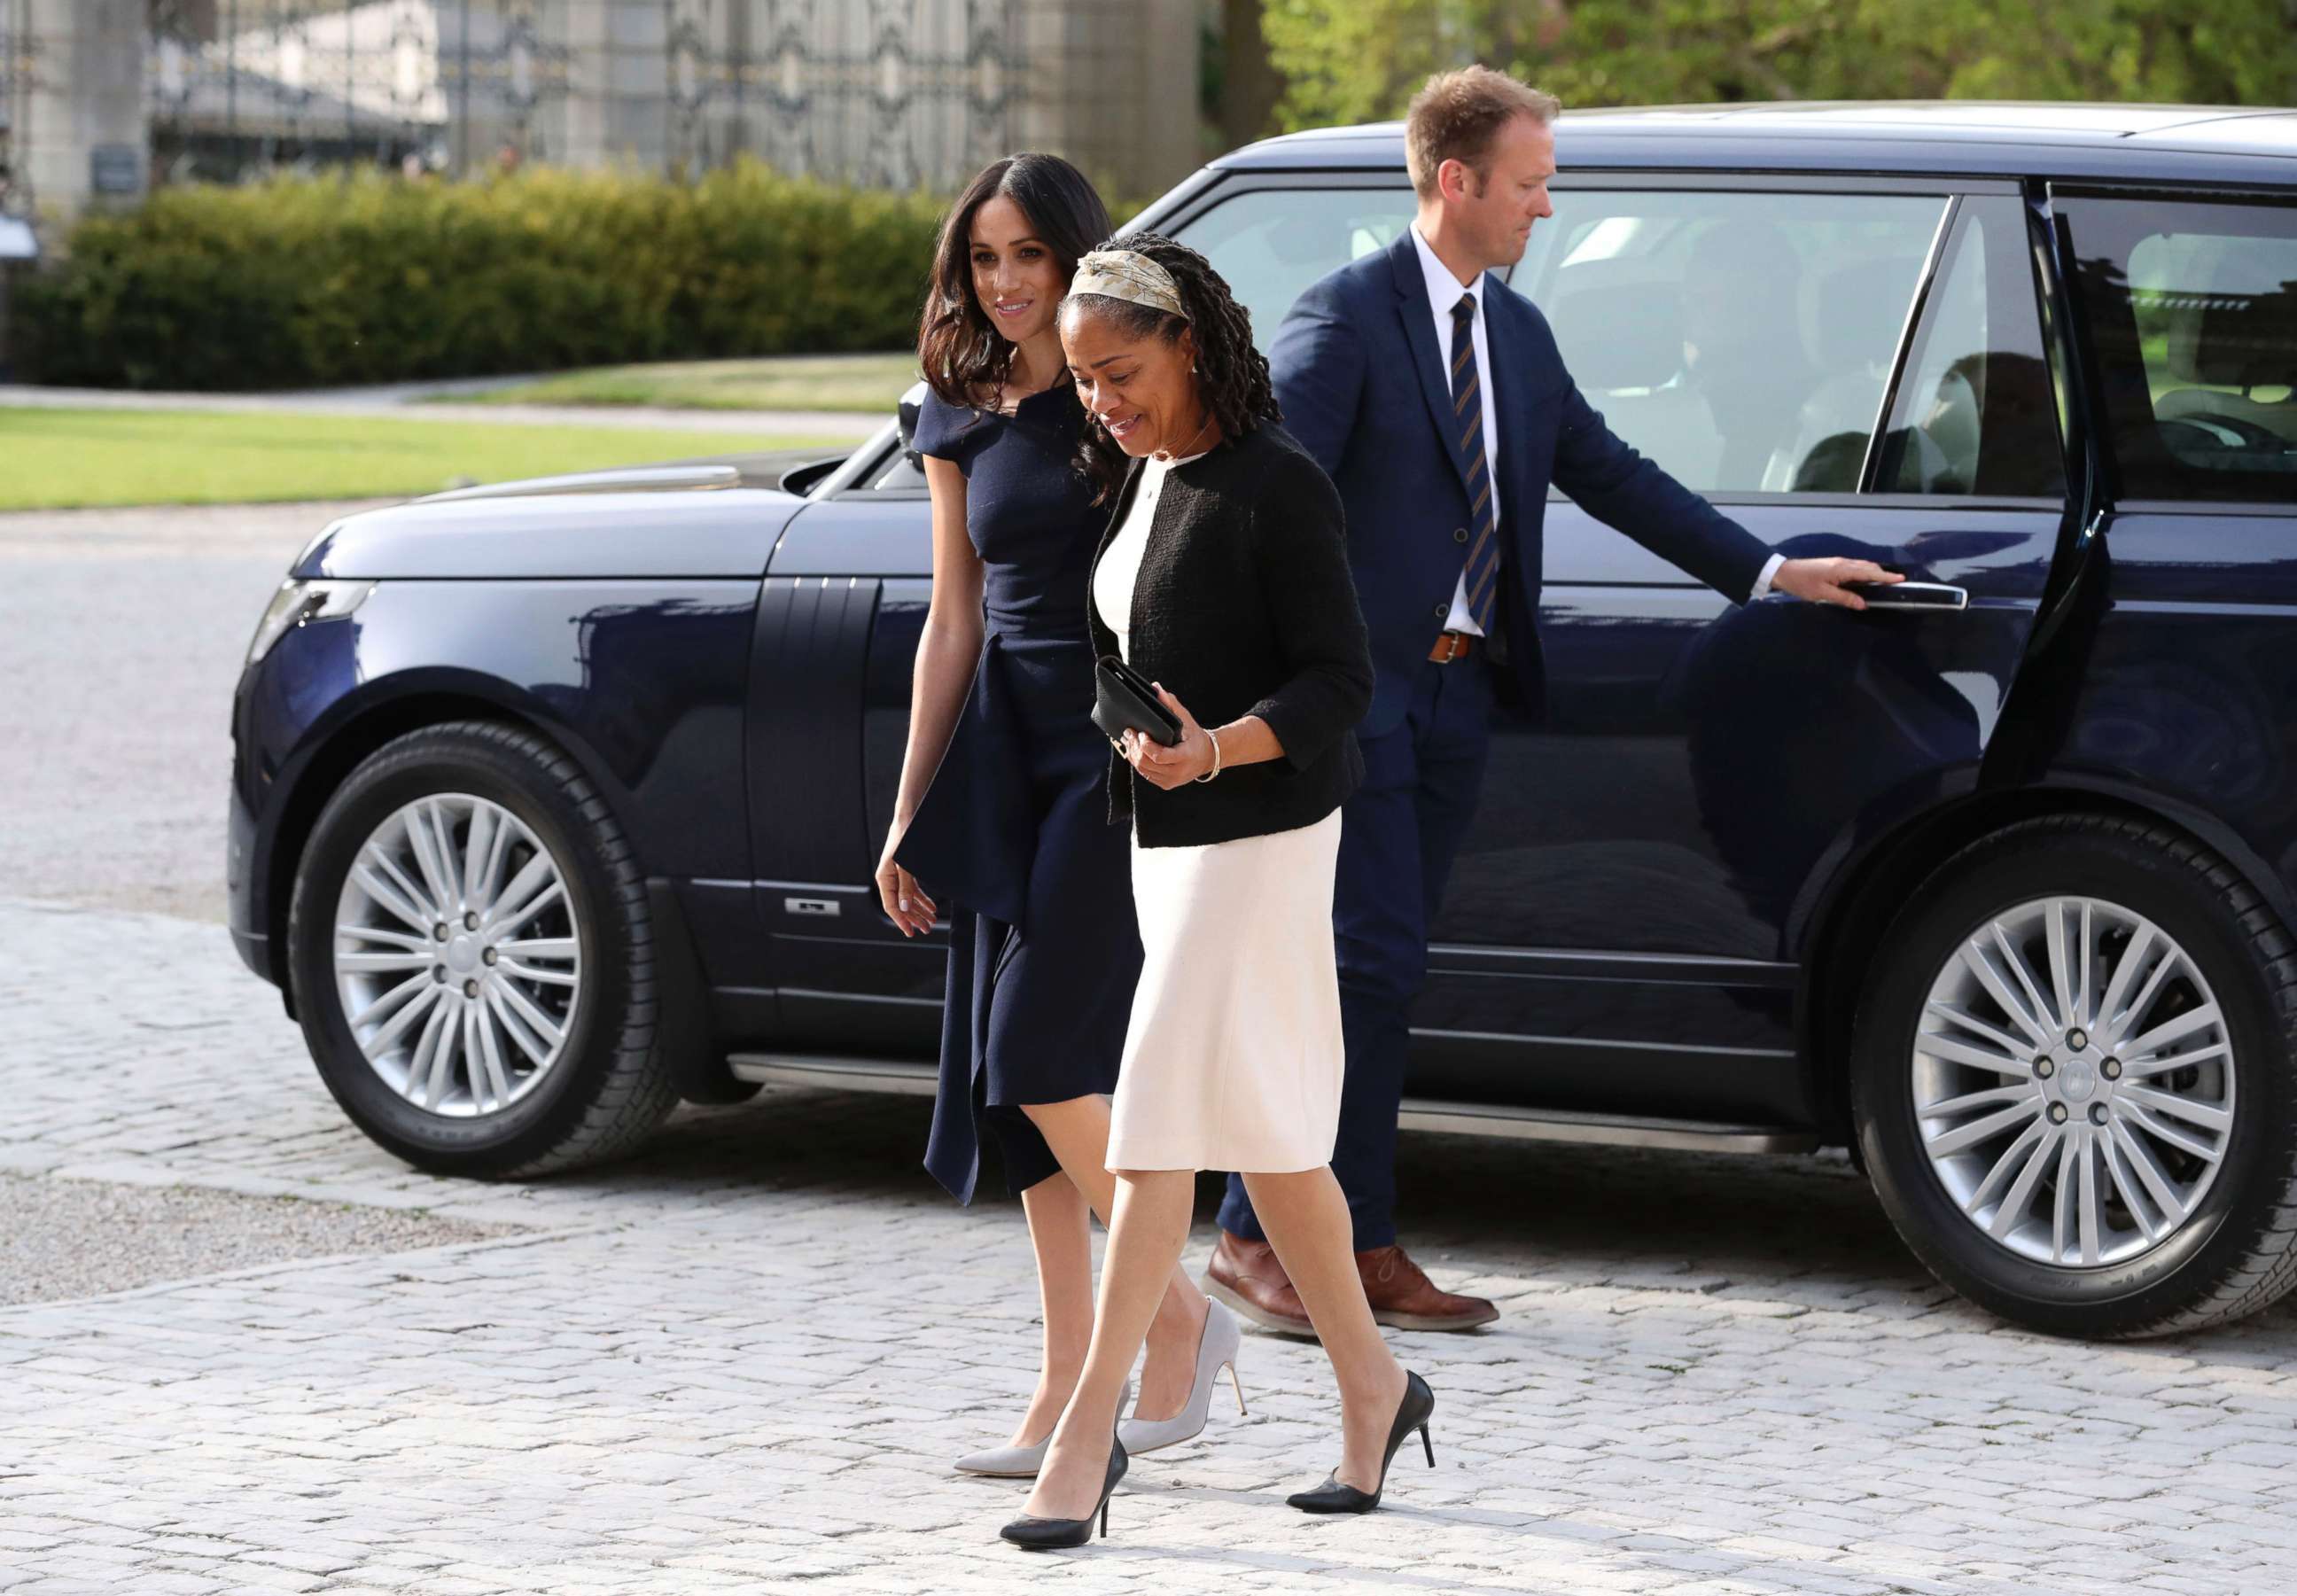 PHOTO: Meghan Markle and her mother, Doria Ragland, arrive at Cliveden House Hotel, in Berkshire, England, May 18, 2018 to spend the night before her wedding to Prince Harry on Saturday.